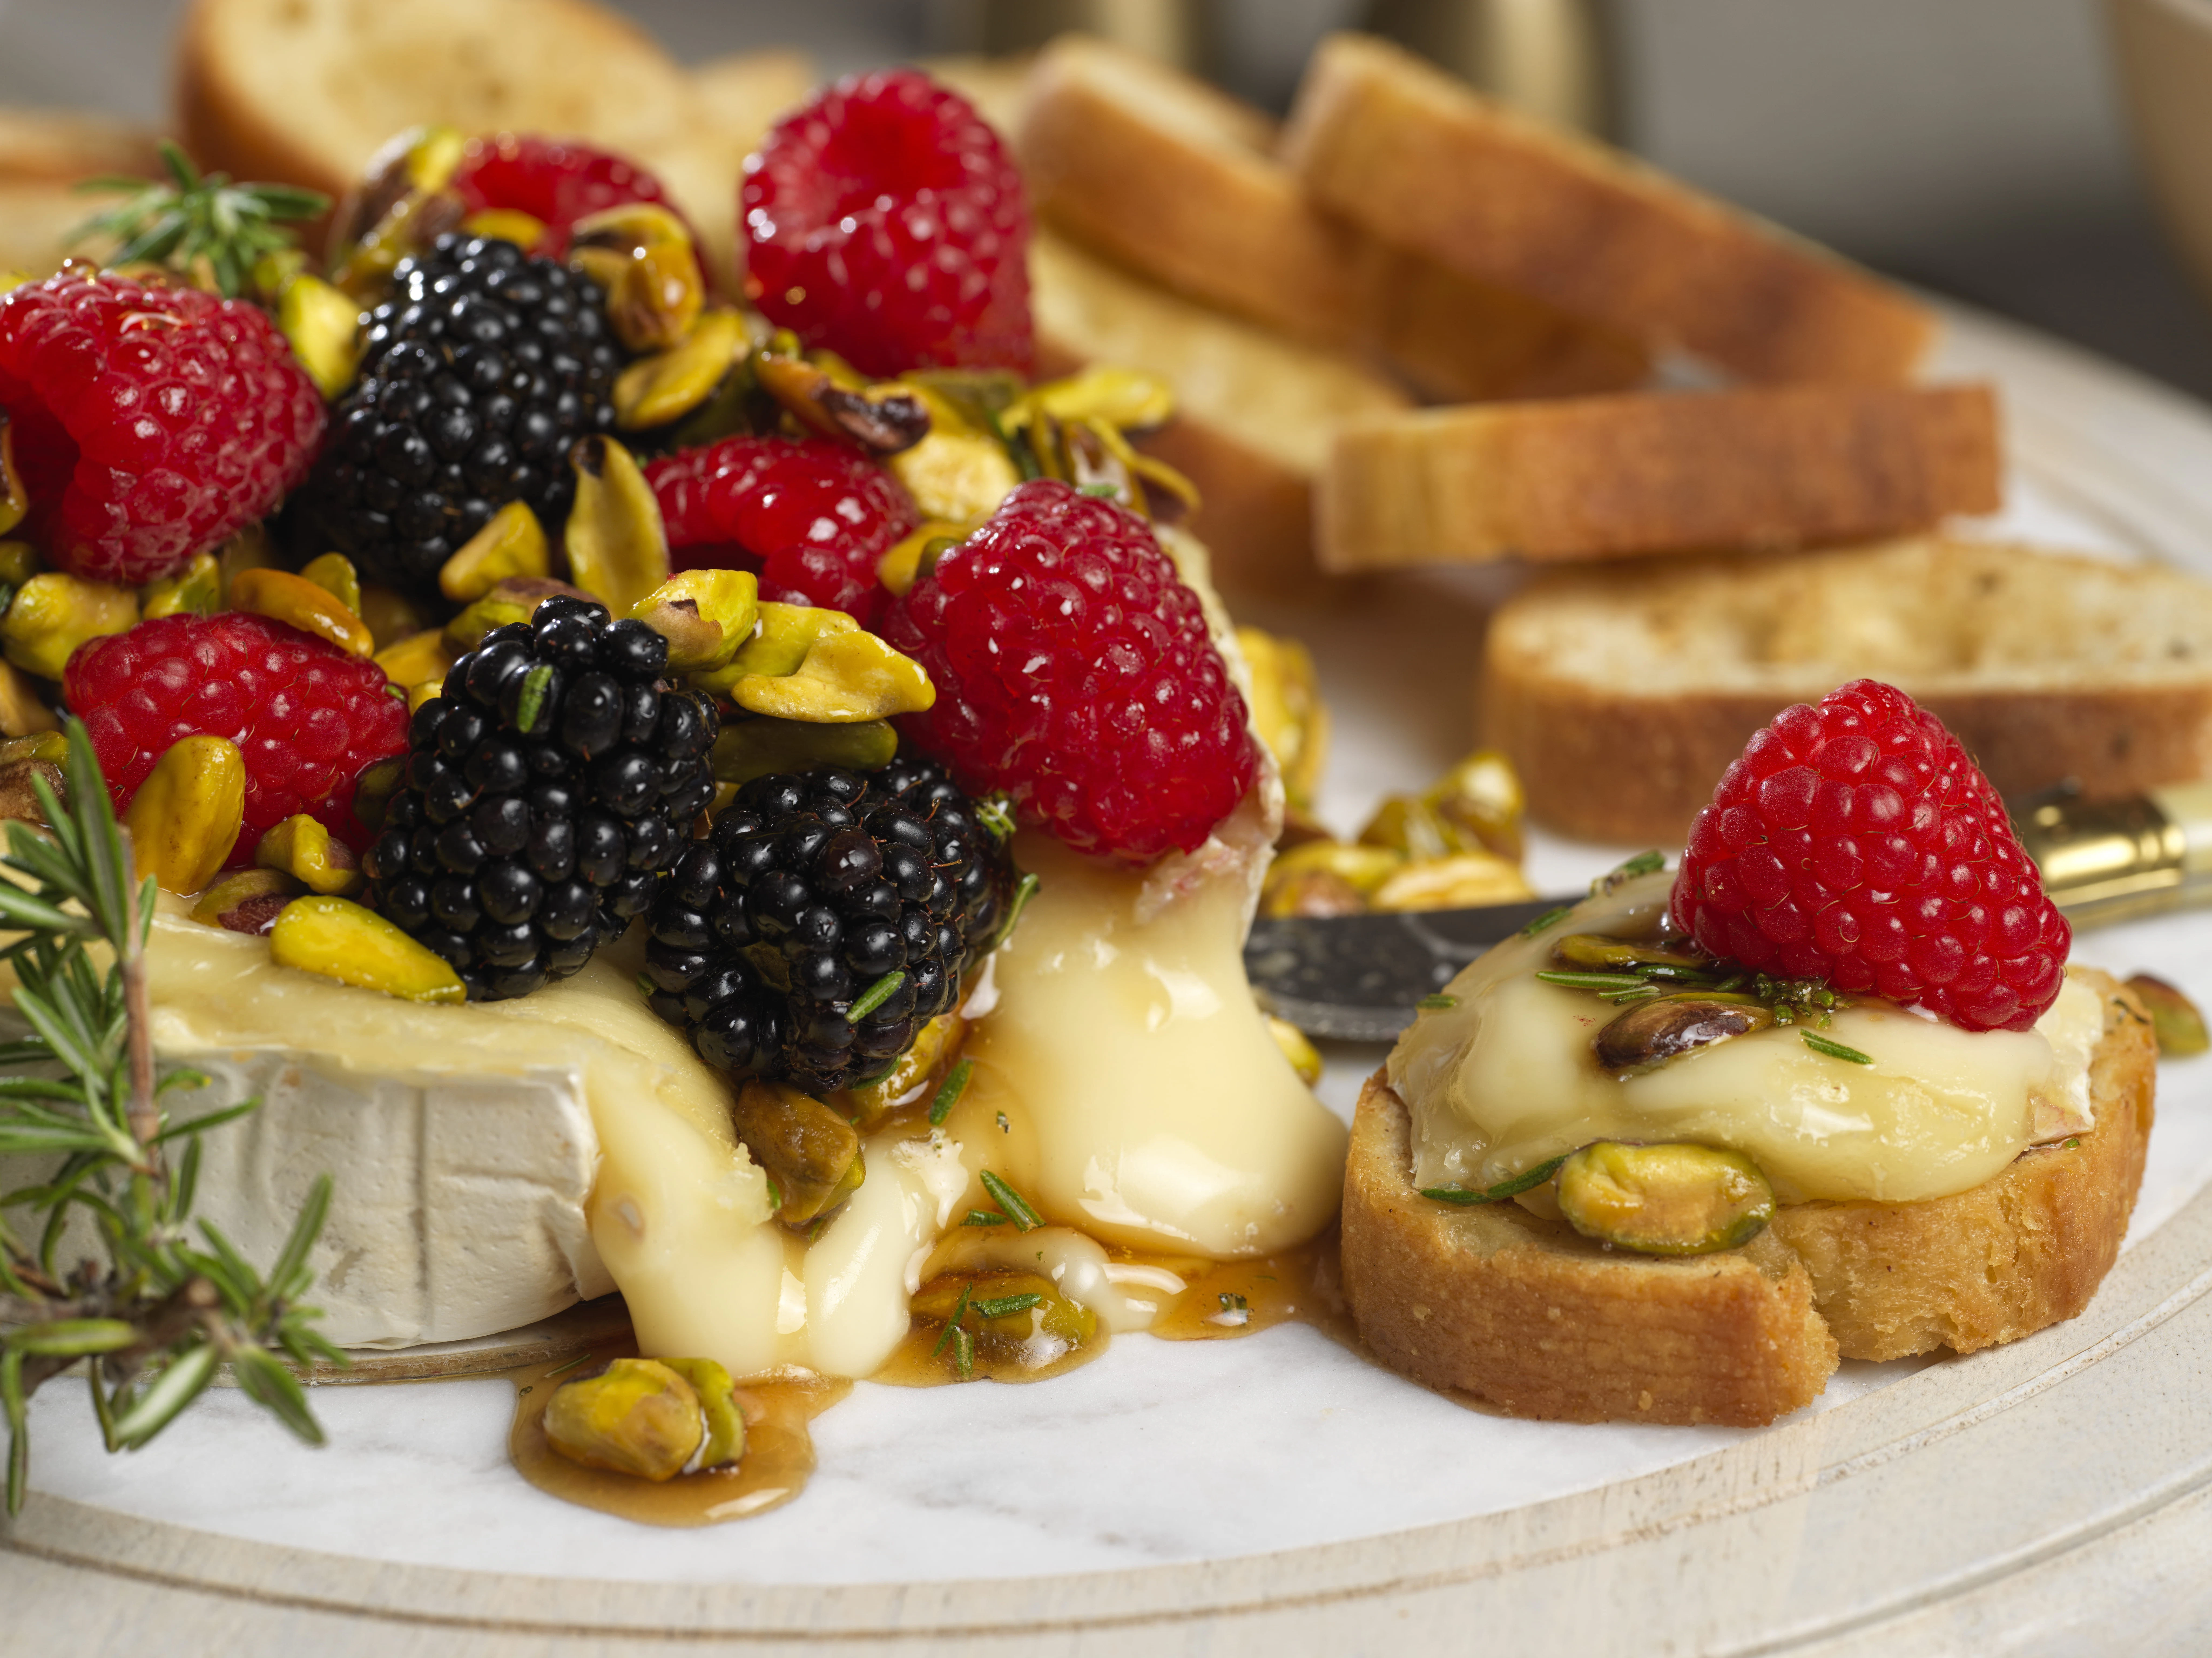 Baked Brie with Honeyed Mixed Berries and Pistachios